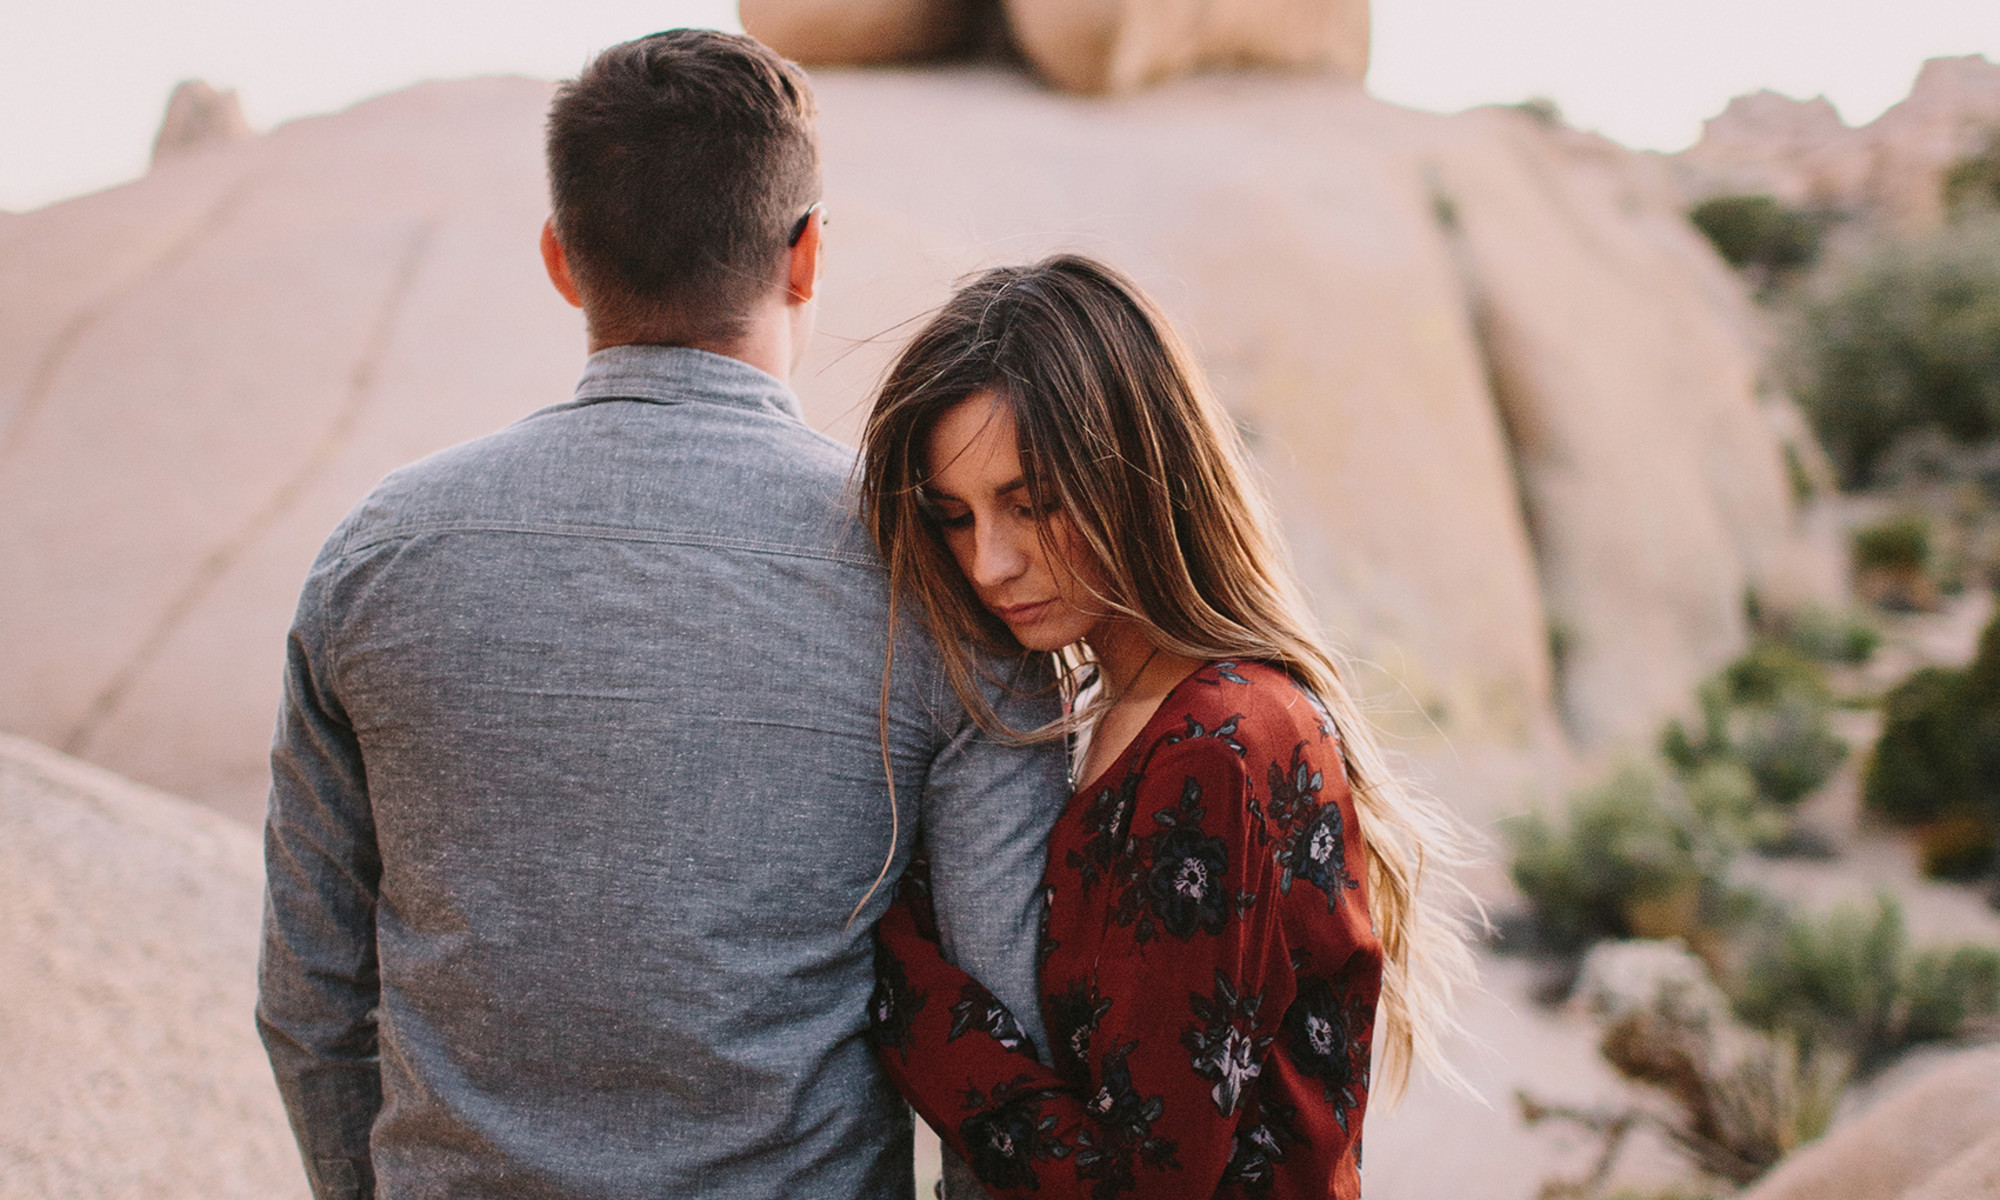 Do You Have Attachment Issues In Relationships? Here's How To Heal Them